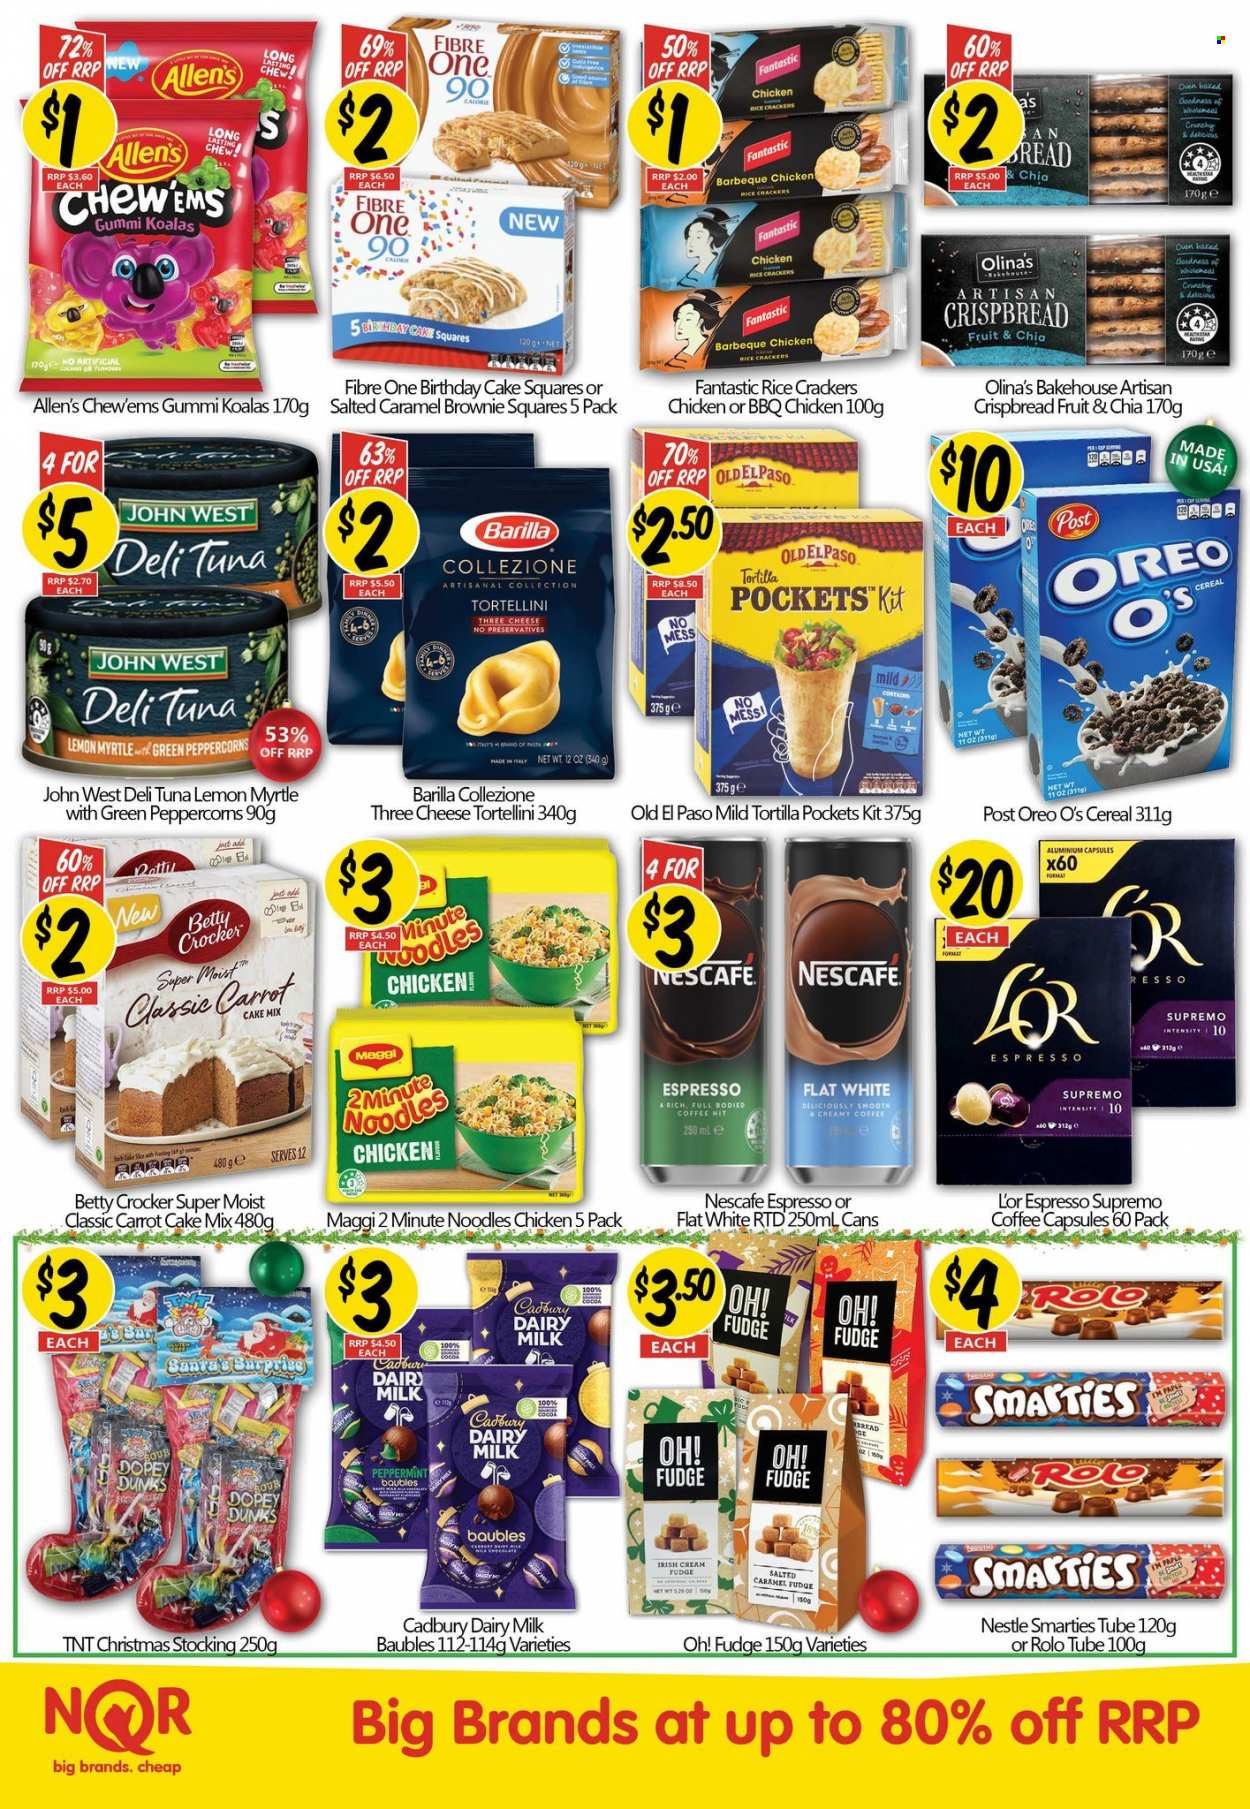 thumbnail - NQR Catalogue - 23 Nov 2022 - 6 Dec 2022 - Sales products - tortillas, Old El Paso, cake squares, birthday cake, crispbread, cake mix, tuna, instant noodles, tortellini, Barilla, noodles, cheese, Oreo, Nestlé, chocolate, Smarties, crackers, Cadbury, Dairy Milk, rice crackers, Maggi, baking mix, cereals, coffee, Nescafé, coffee capsules, L'Or, irish cream, bauble, mouse. Page 2.